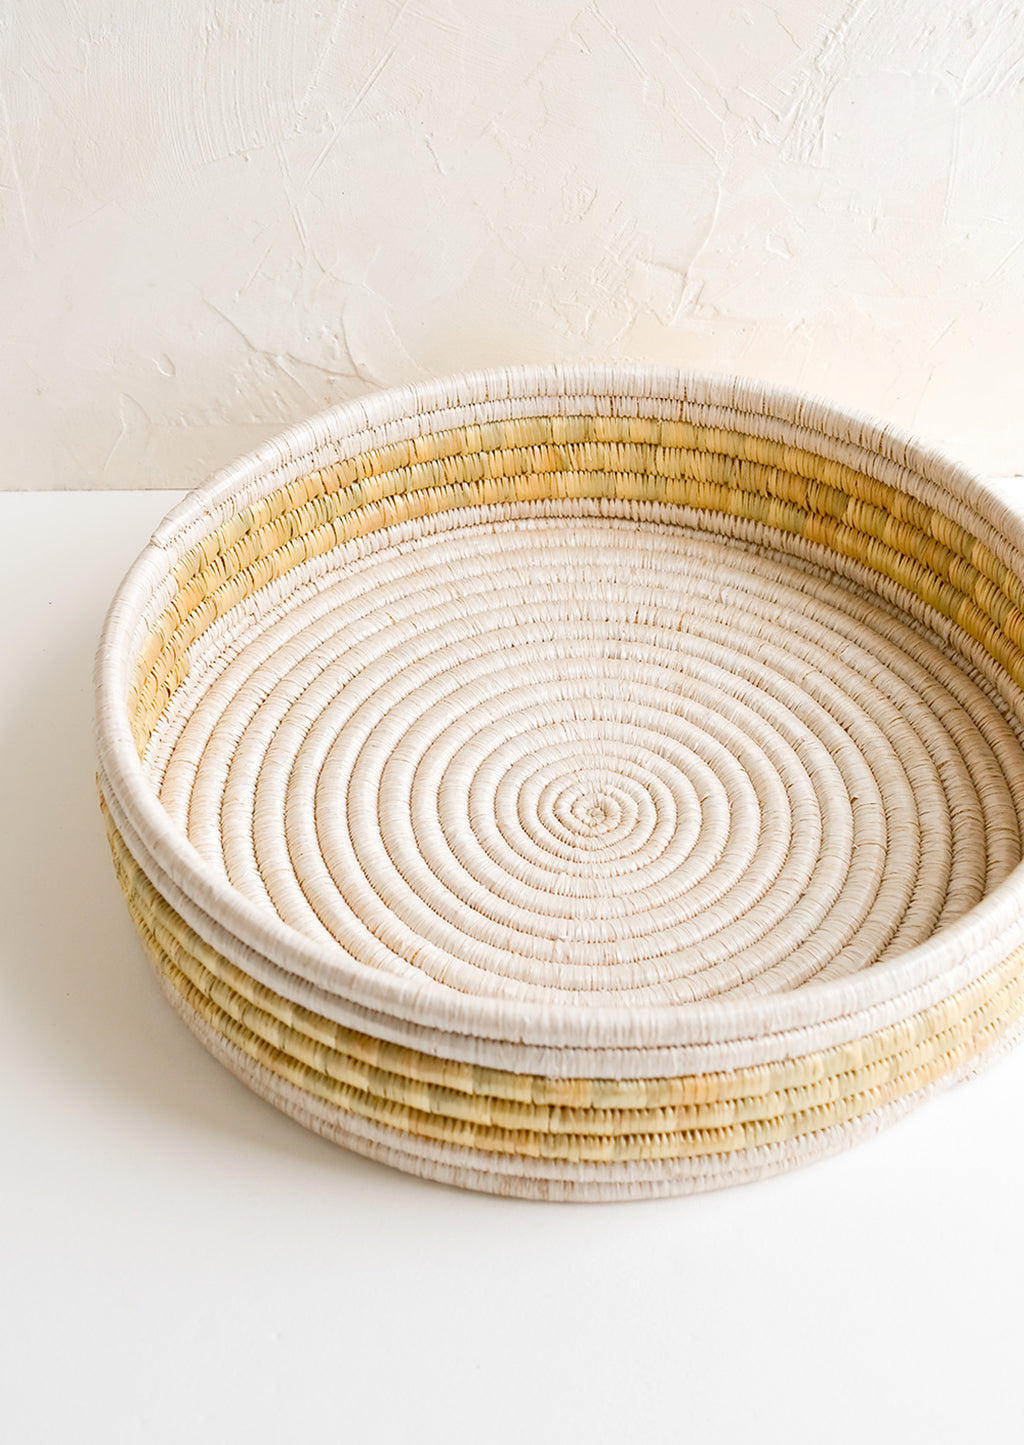 3: A round, shallow woven seagrass tray in white and beige.